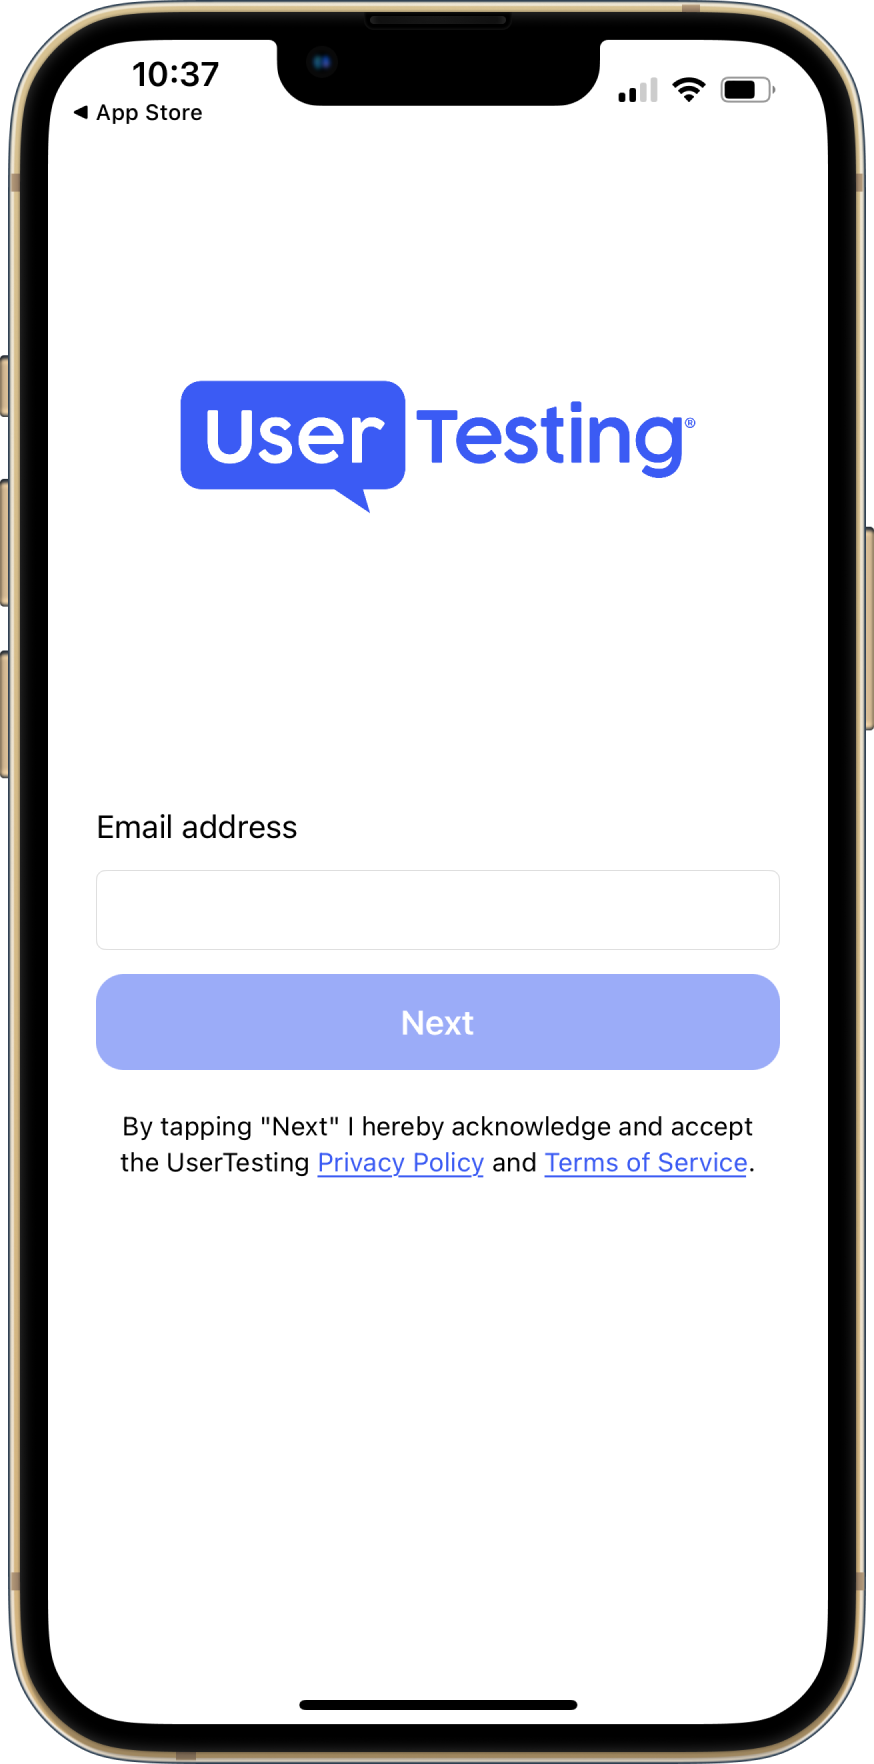 The UserTesting mobile sign in screen. There is a field to input your email address and a Next button to continue to the following screen. The Next button is disabled to indicate that the email address is required.